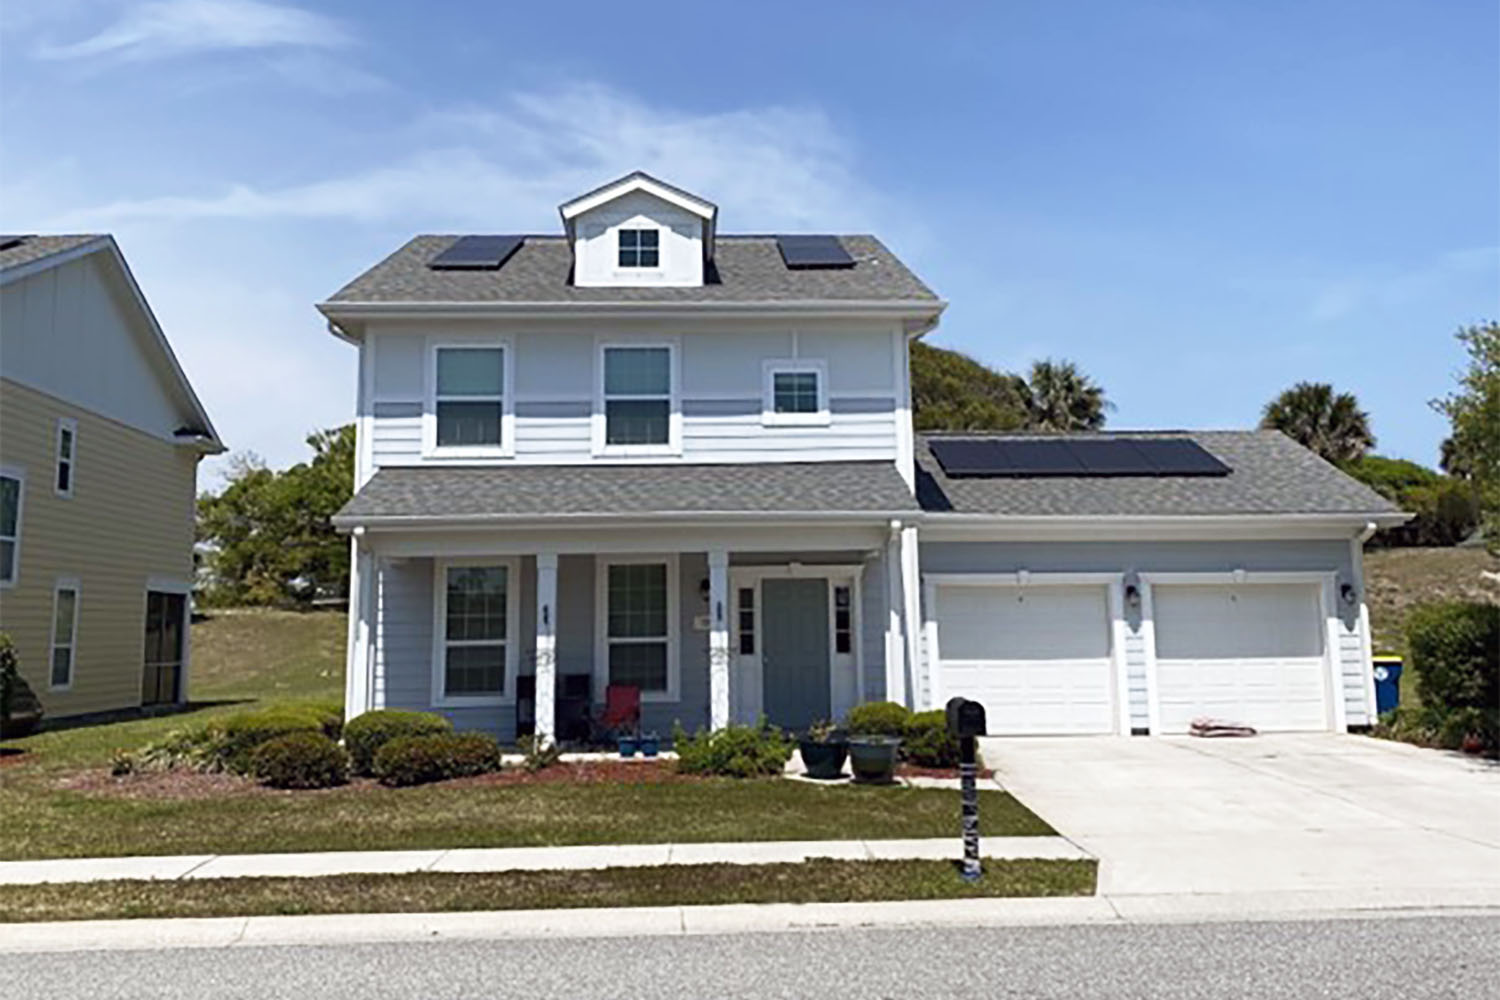 Balfour Beatty Communities Continues to Invest in Military Housing Sustainability with Expanded Solar Initiative